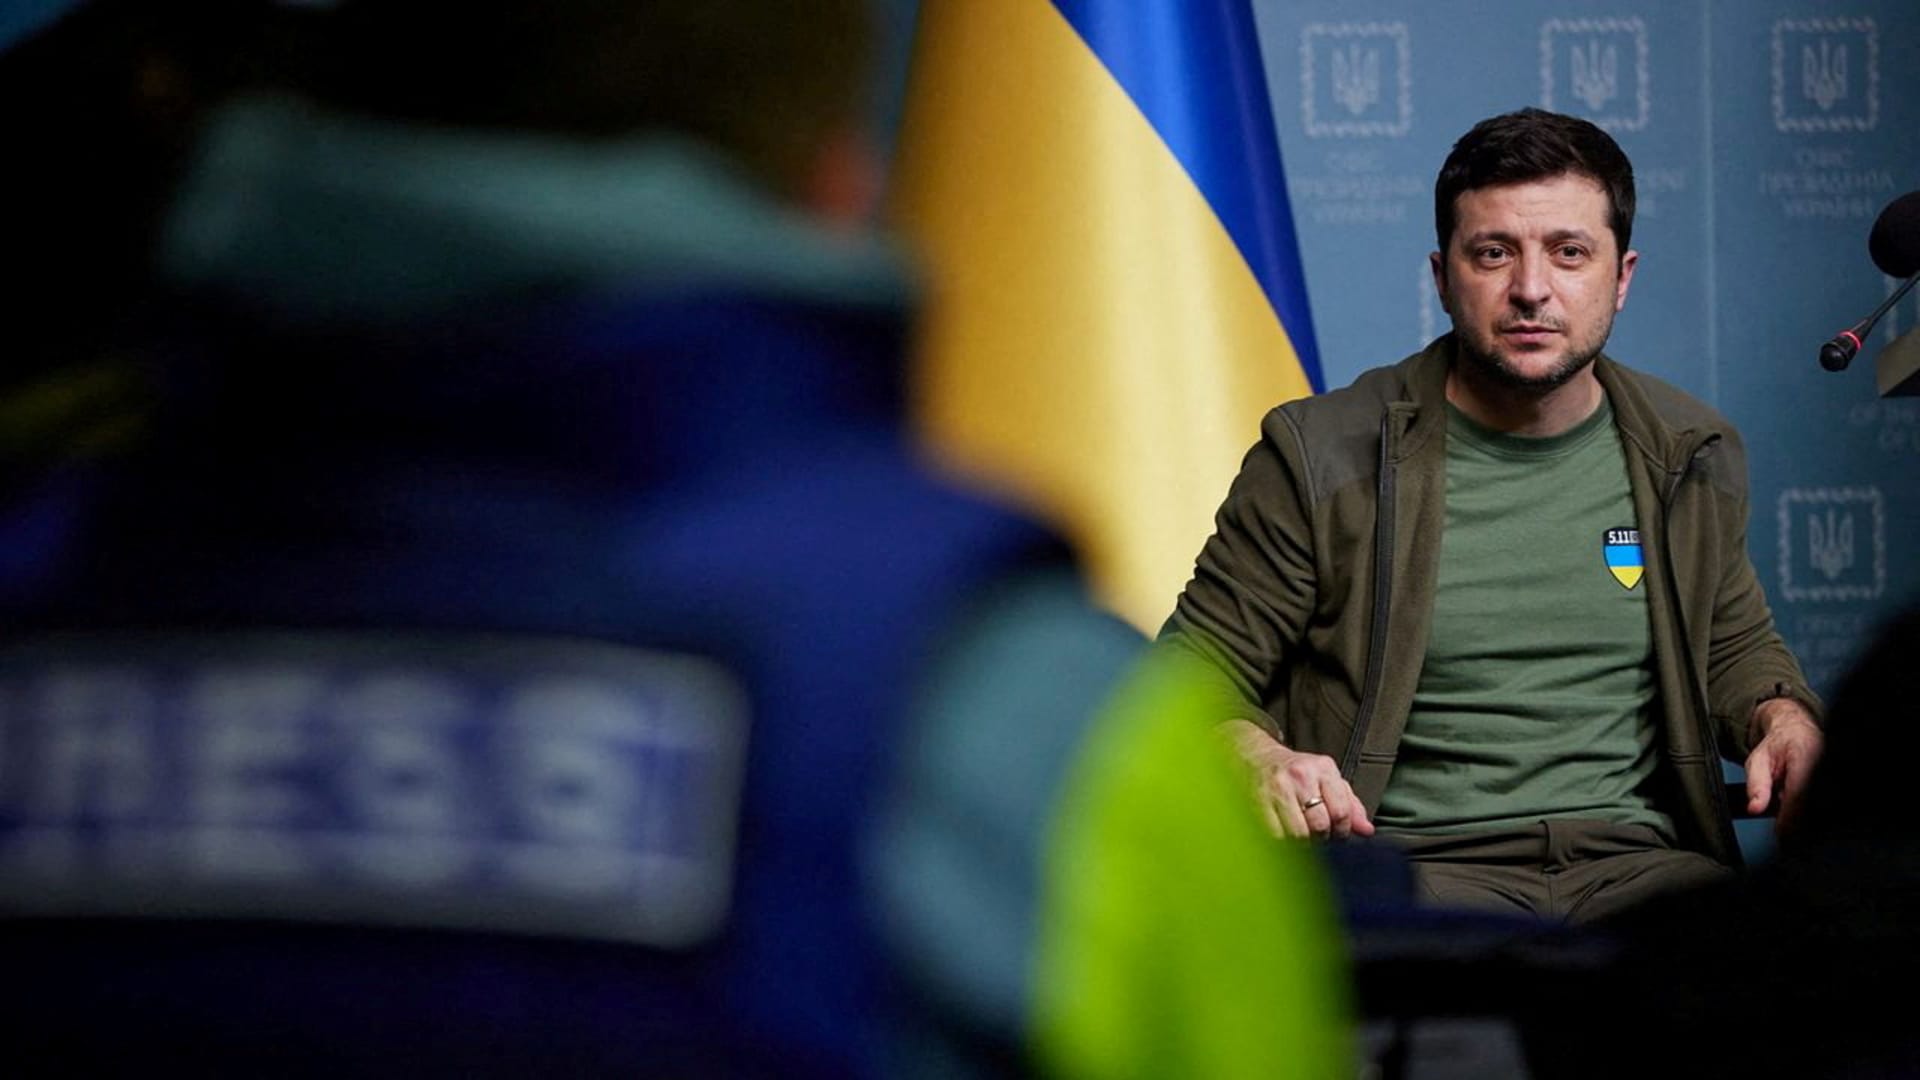 Ukrainian President Volodymyr Zelenskyy attends an interview with foreign media in Kyiv, Ukraine, March 3, 2022.